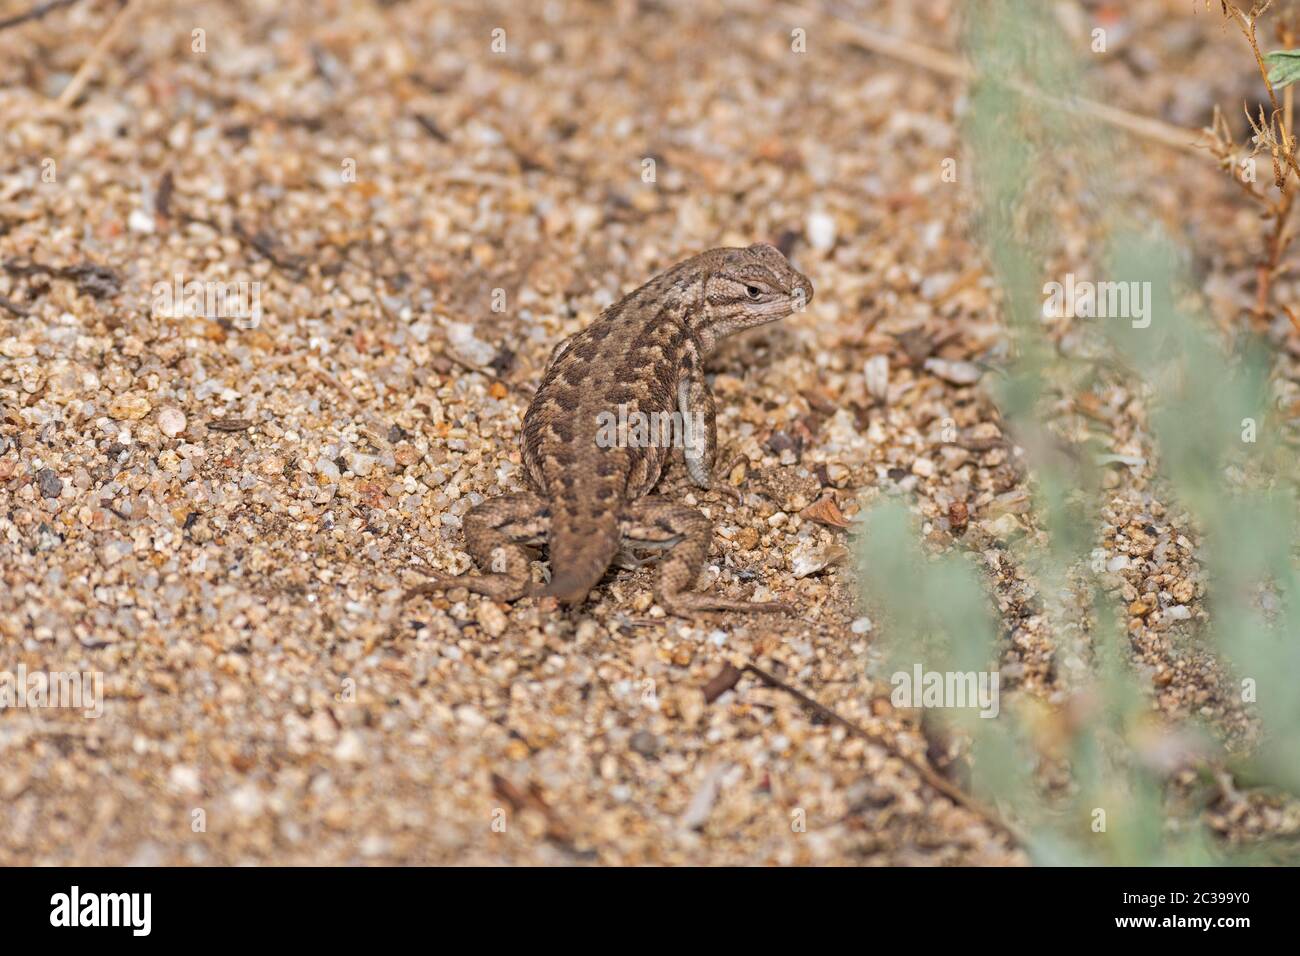 Northern Side blotched Lizard in the Sagebrush in Great Basin National Park in Nevada Stock Photo